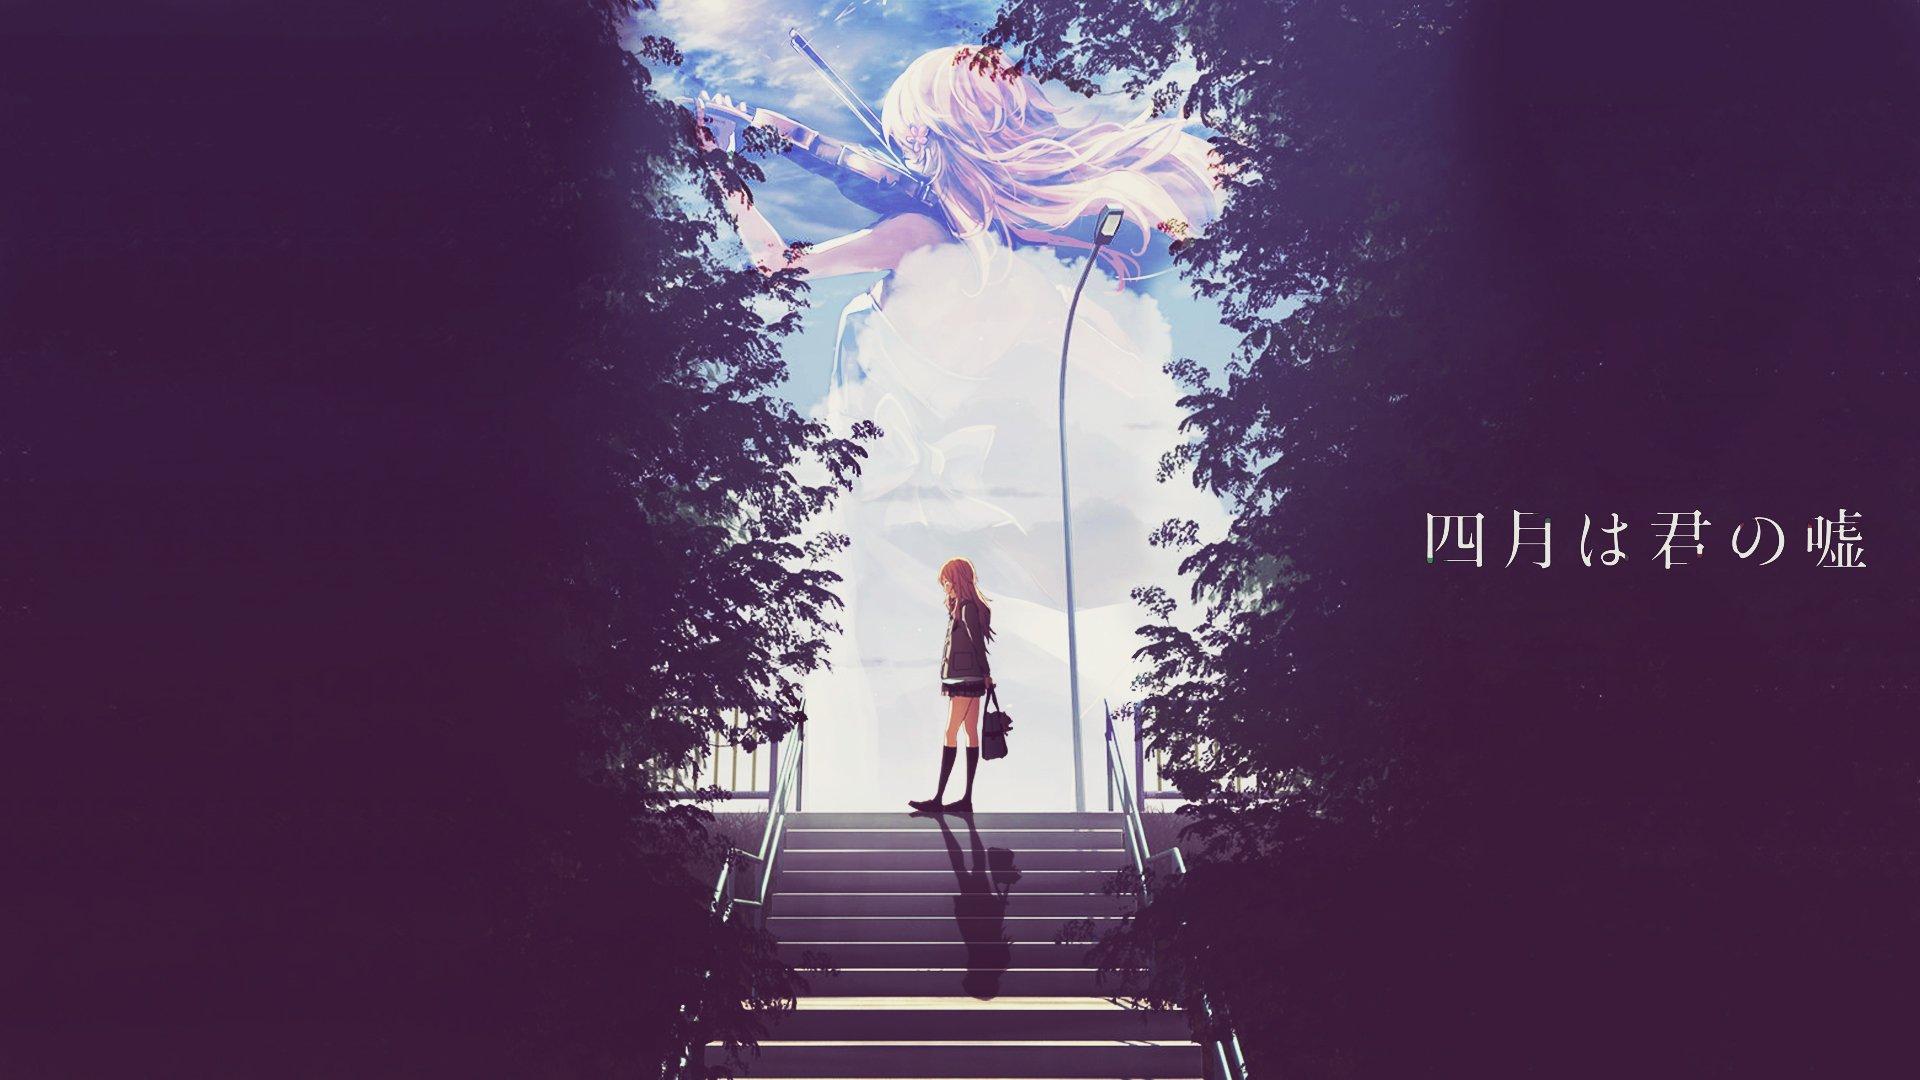 Your Lie in April HD Wallpaper